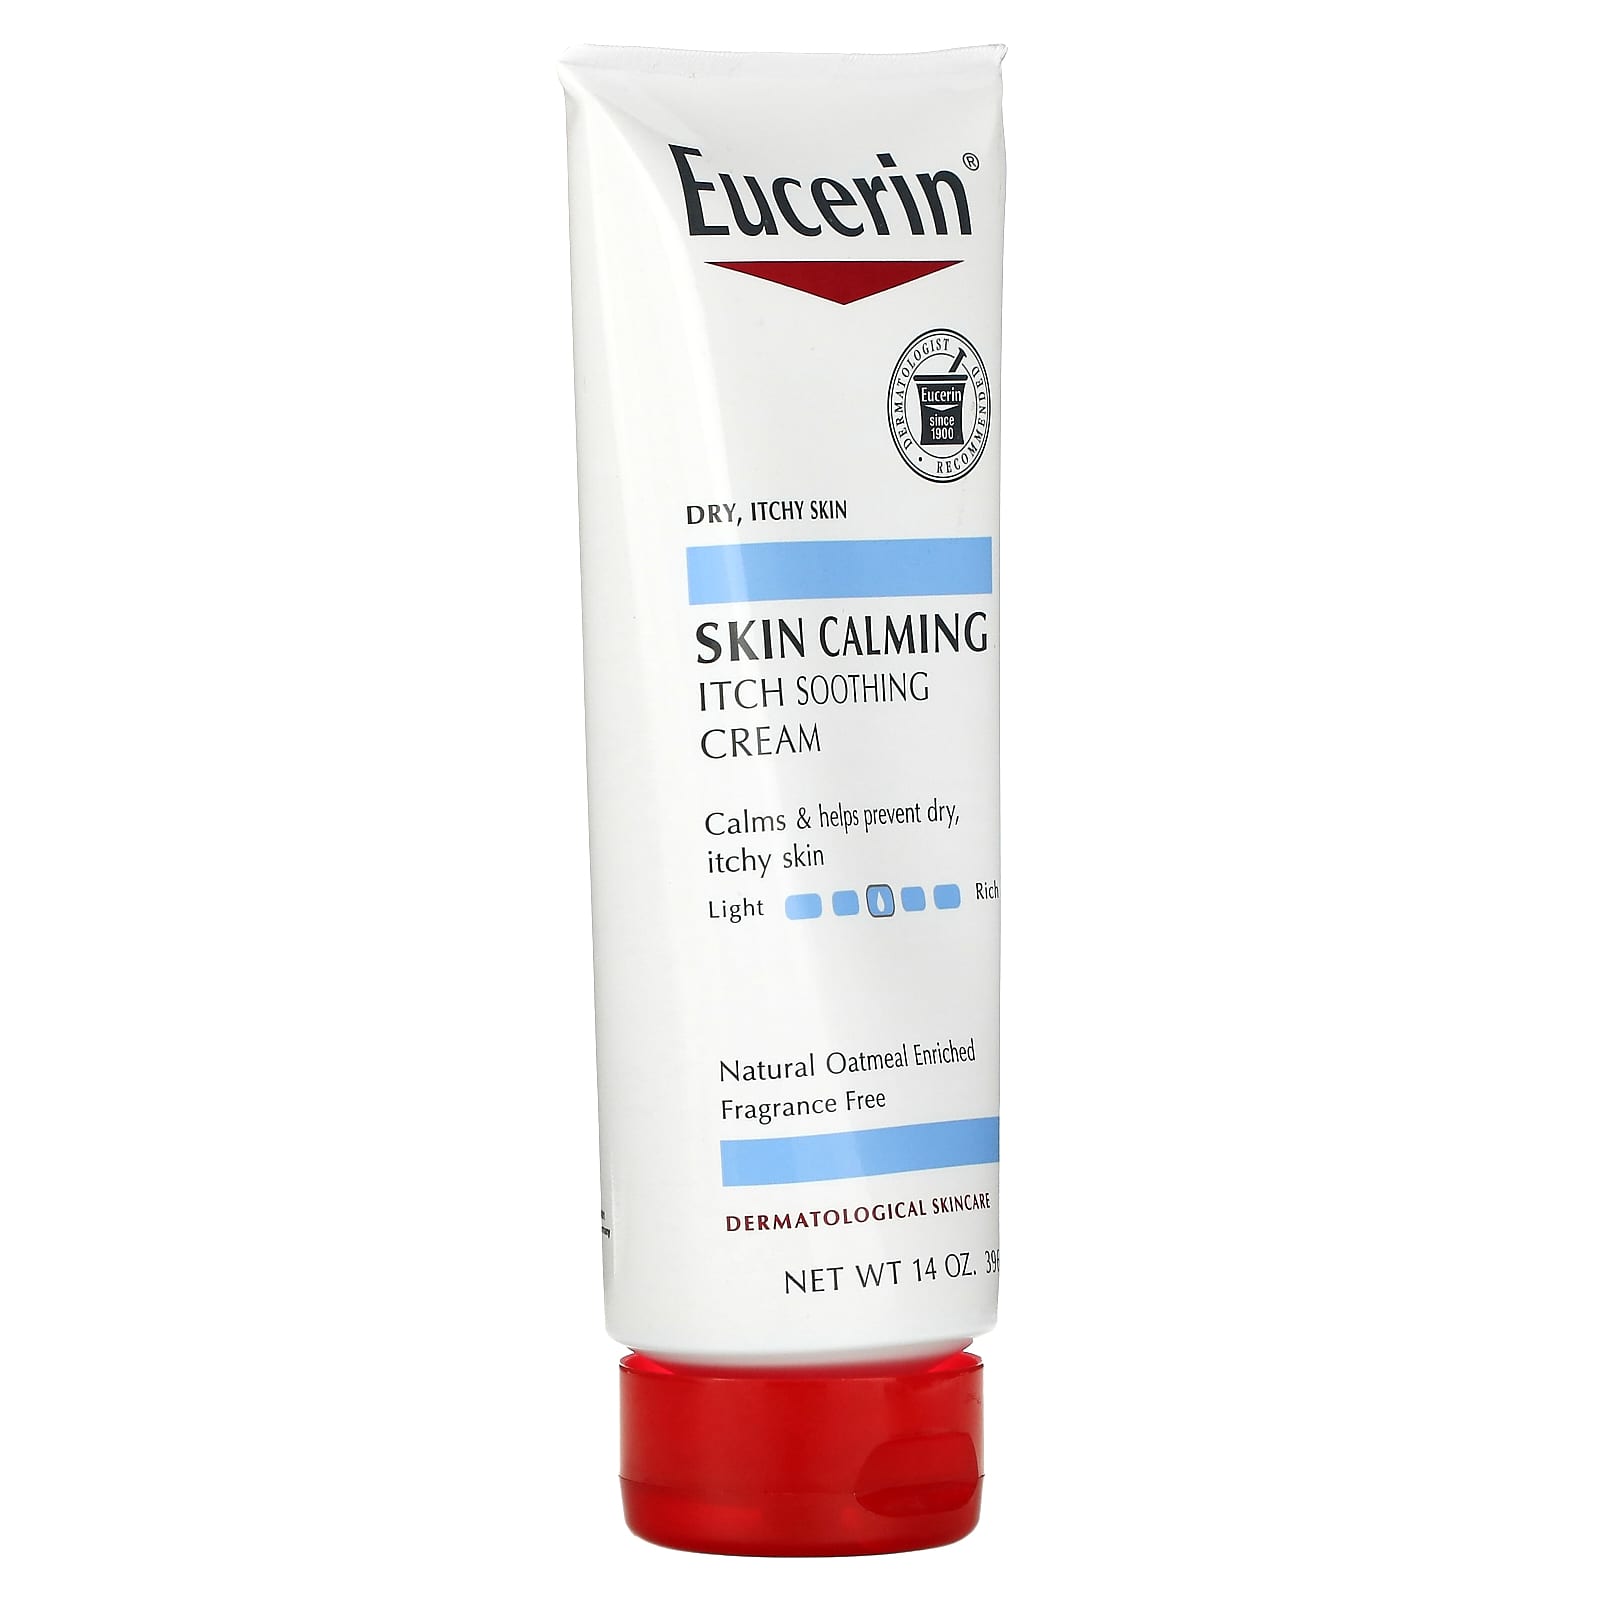 Eucerin, Skin Calming Itch Soothing Cream (396g) Eucerin